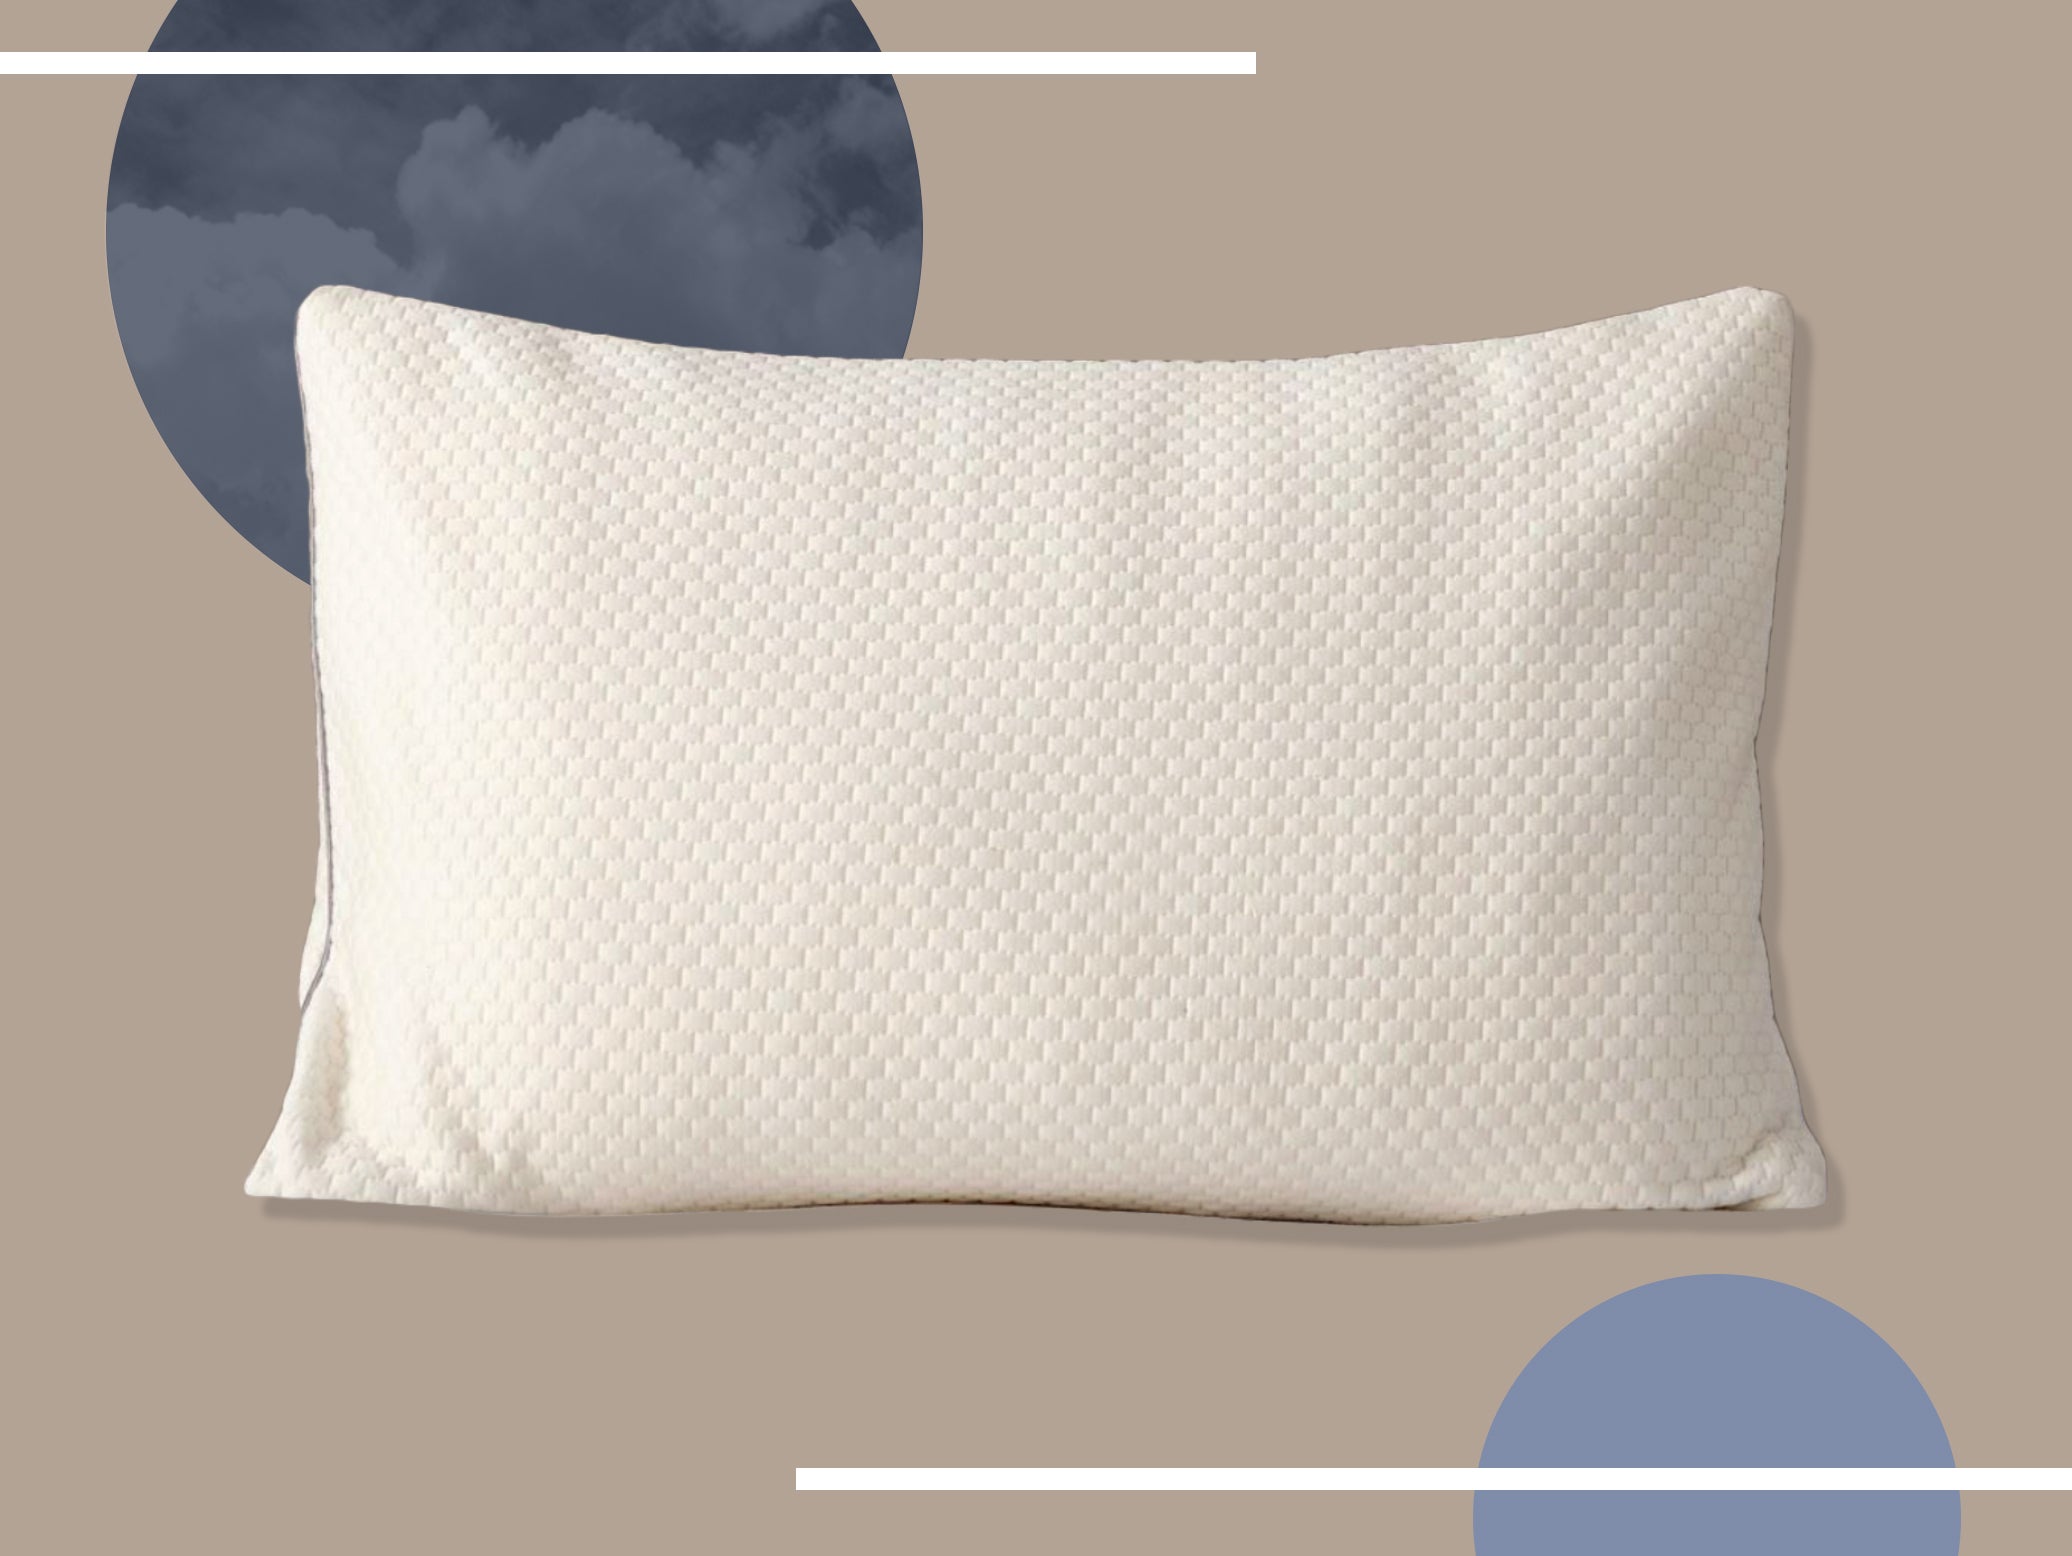 We considered the pillow’s firmness, comfort, care, price and more